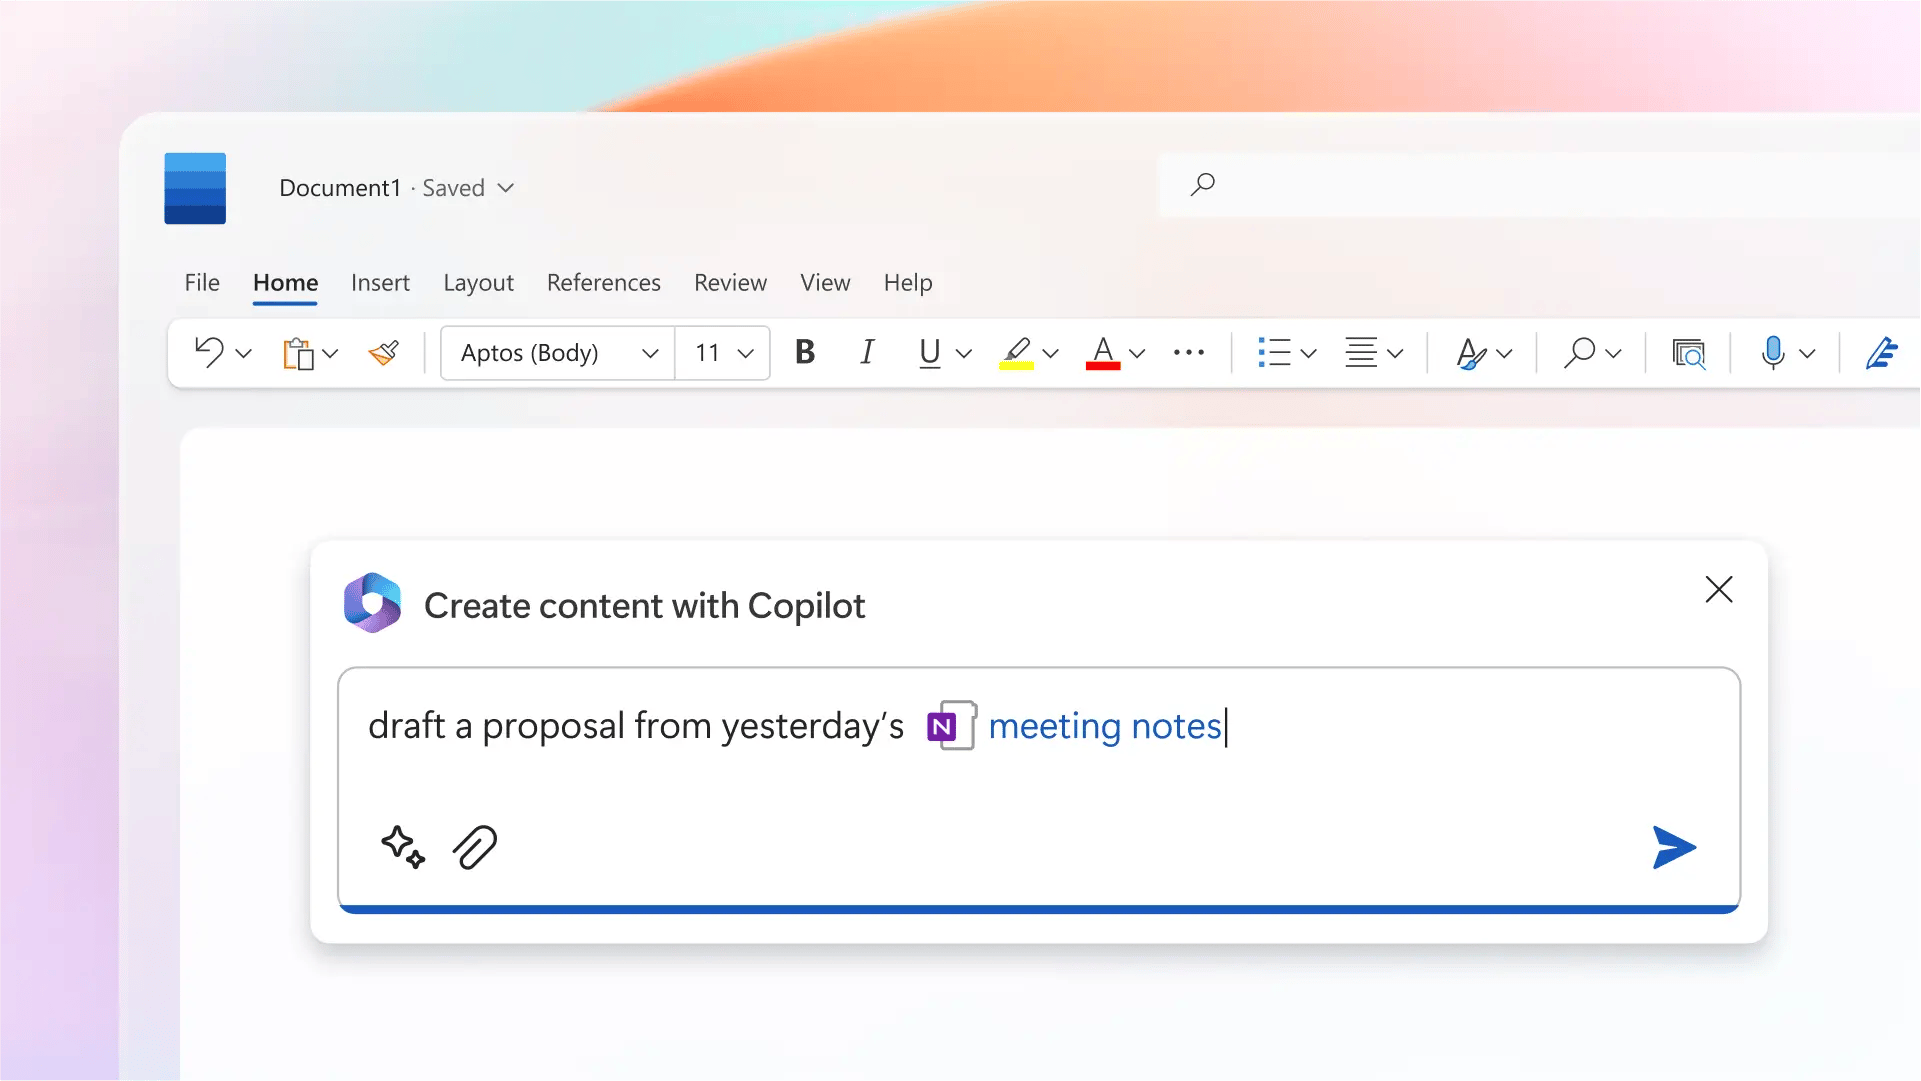 Create content with Copilot in Word